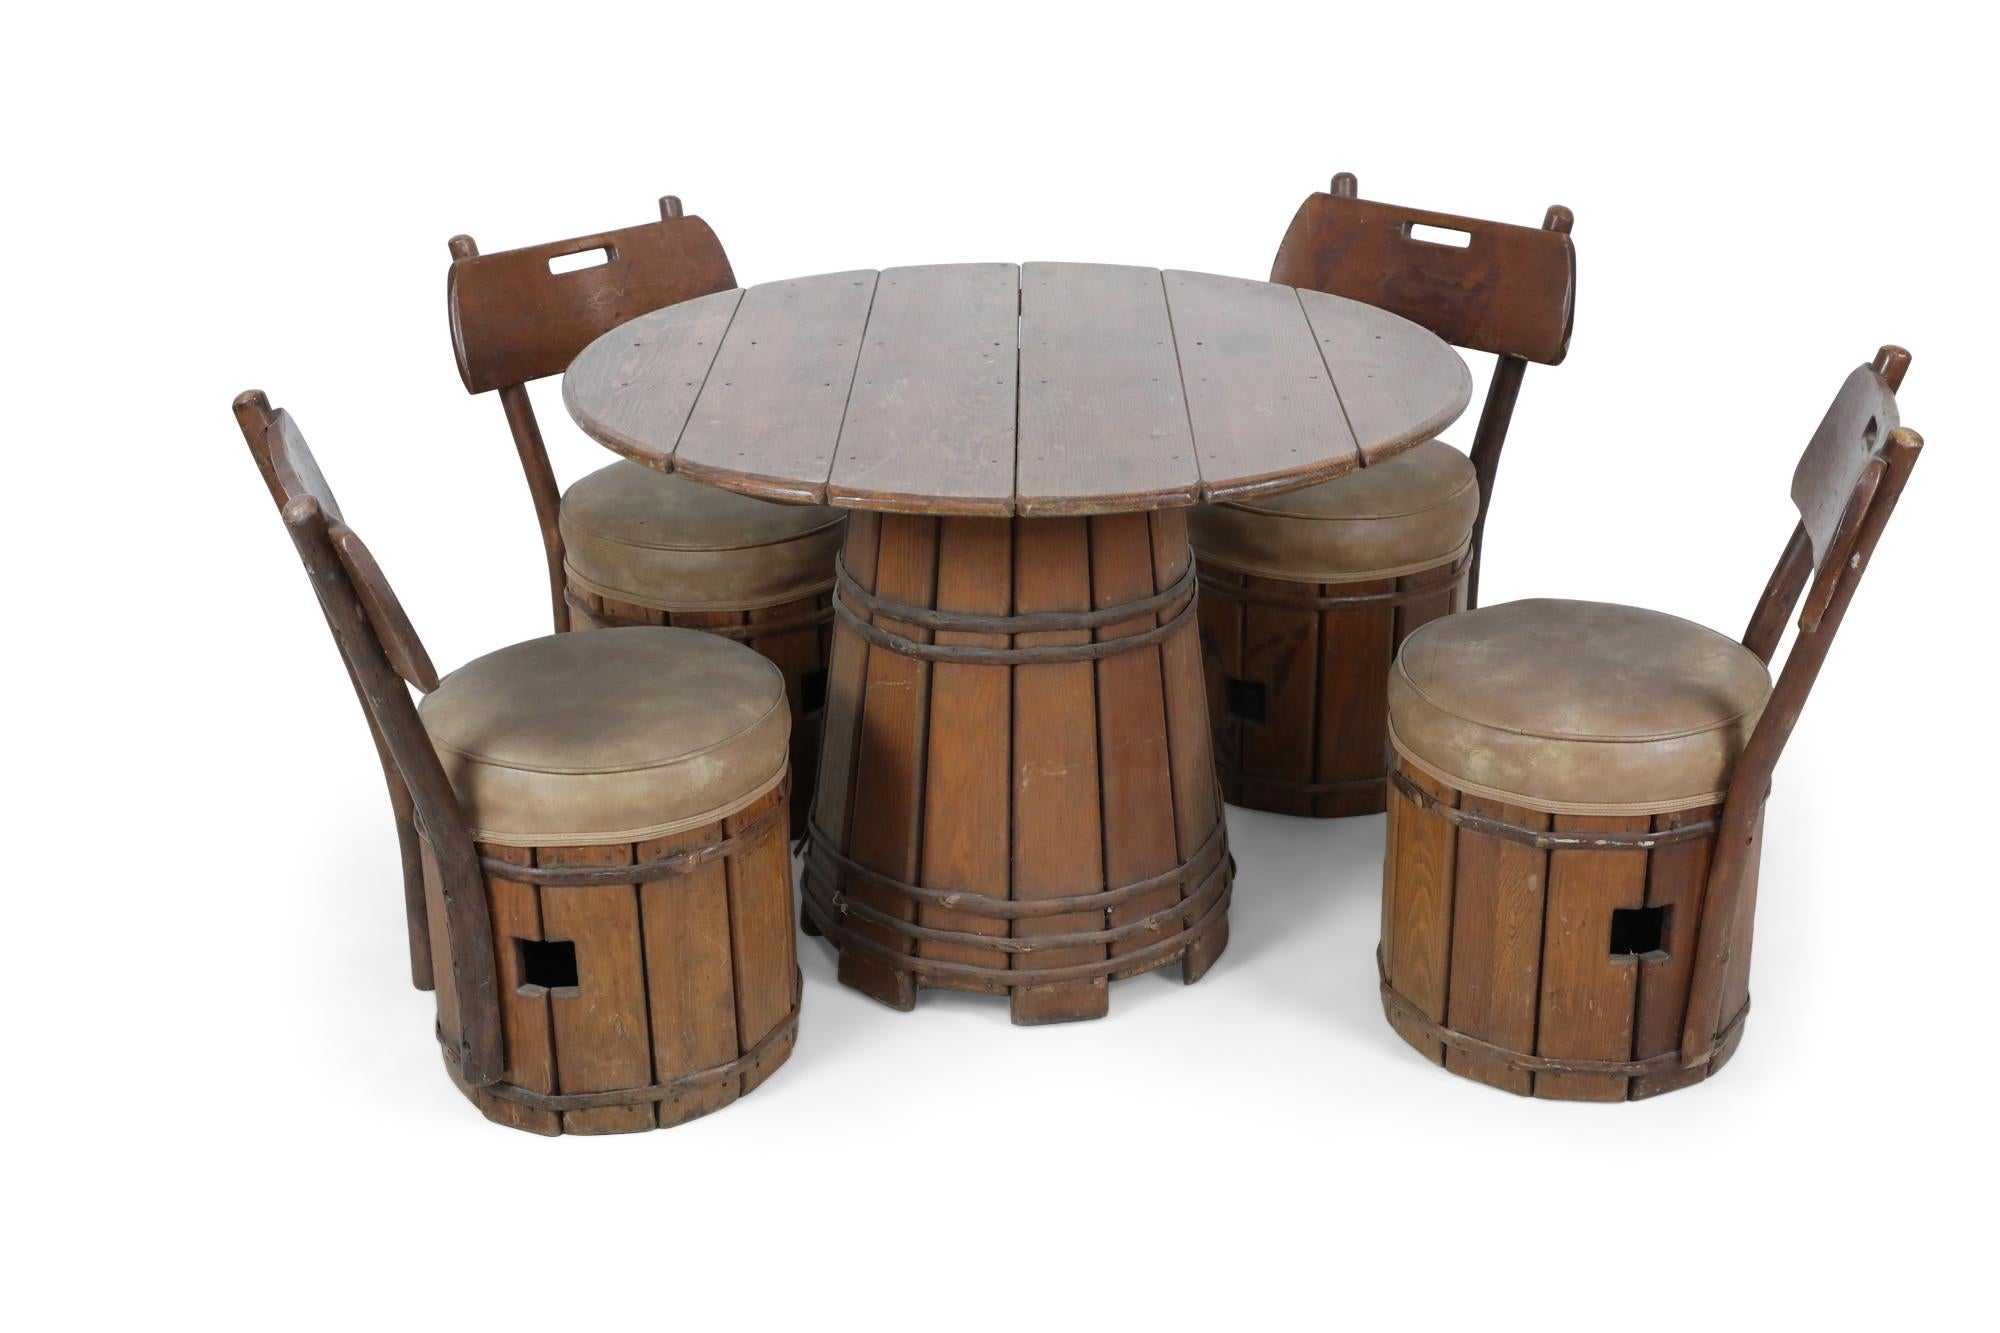 5 piece American rustic old hickory pub set composed of a round table with a slat barrel base and 4 matching side chairs with a slat barrel base and round vinyl upholstered seat. (Branded: OLD HICKORY, MARTINSVILLE, INDIANA).

Table dimensions: